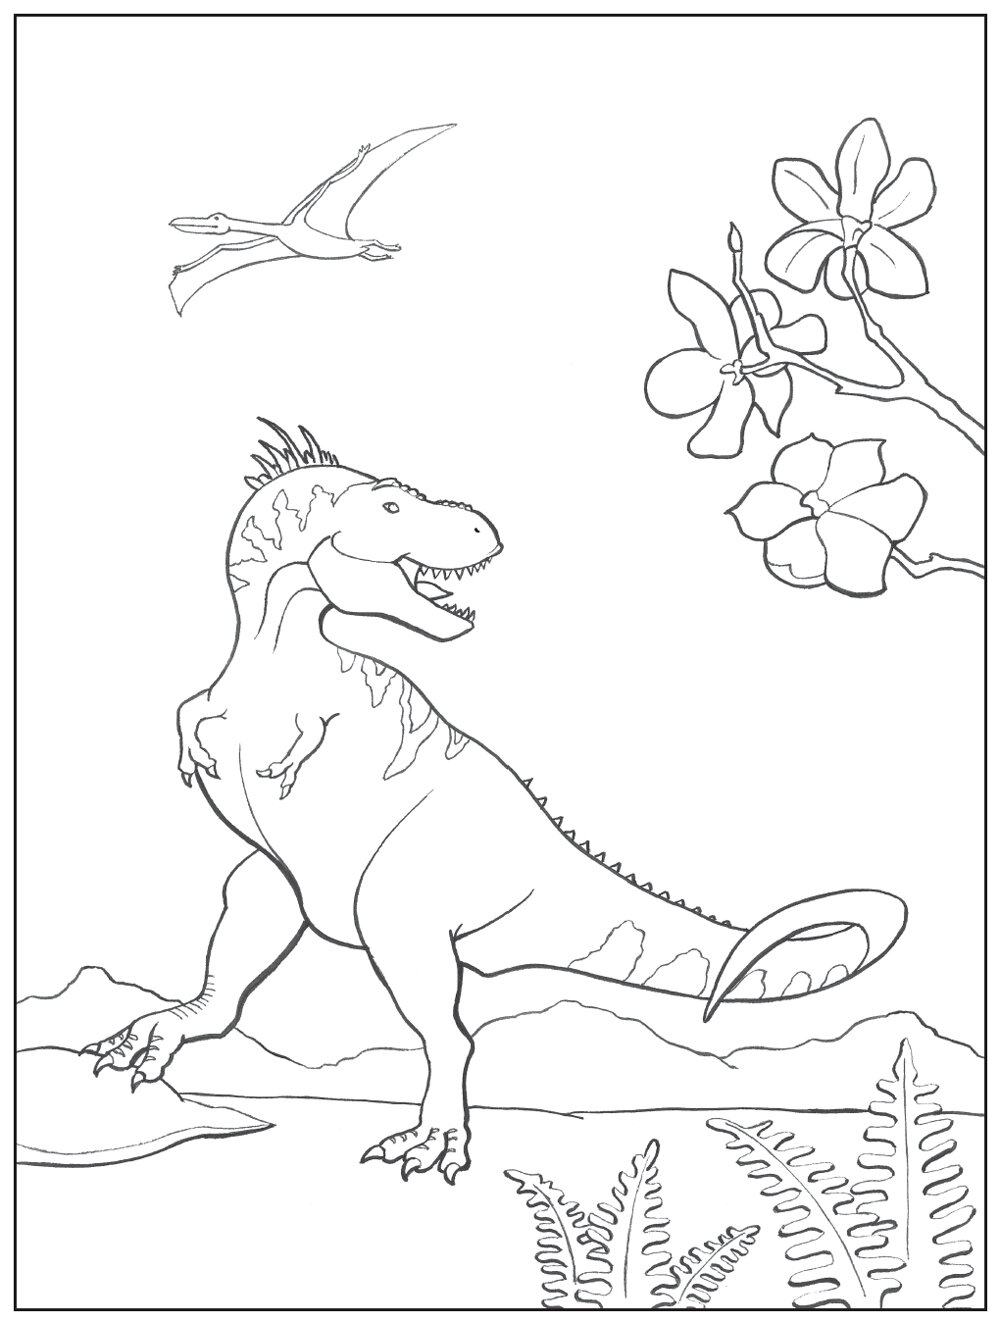 Coloring Activity for Children: Cecil's Colossal Journey Through Time! —  Paleontological Research Institution